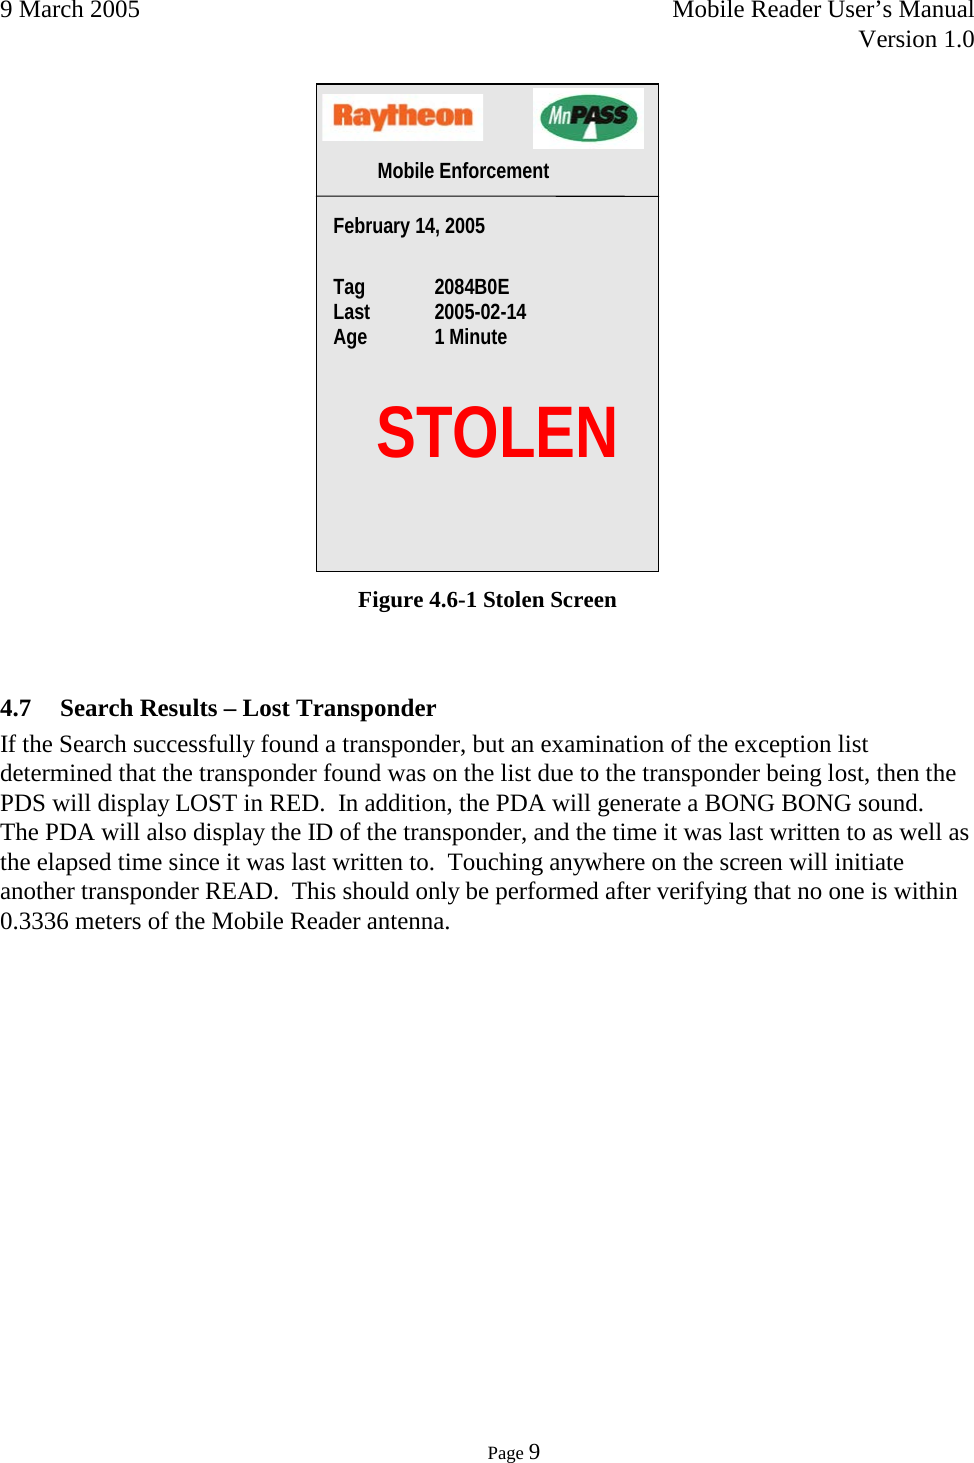 9 March 2005    Mobile Reader User’s Manual   Version 1.0      Page 9   Figure 4.6-1 Stolen Screen  4.7 Search Results – Lost Transponder If the Search successfully found a transponder, but an examination of the exception list determined that the transponder found was on the list due to the transponder being lost, then the PDS will display LOST in RED.  In addition, the PDA will generate a BONG BONG sound.  The PDA will also display the ID of the transponder, and the time it was last written to as well as the elapsed time since it was last written to.  Touching anywhere on the screen will initiate another transponder READ.  This should only be performed after verifying that no one is within 0.3336 meters of the Mobile Reader antenna.     STOLEN February 14, 2005   Tag  2084B0E Last  2005-02-14   Age 1 Minute  Mobile Enforcement  